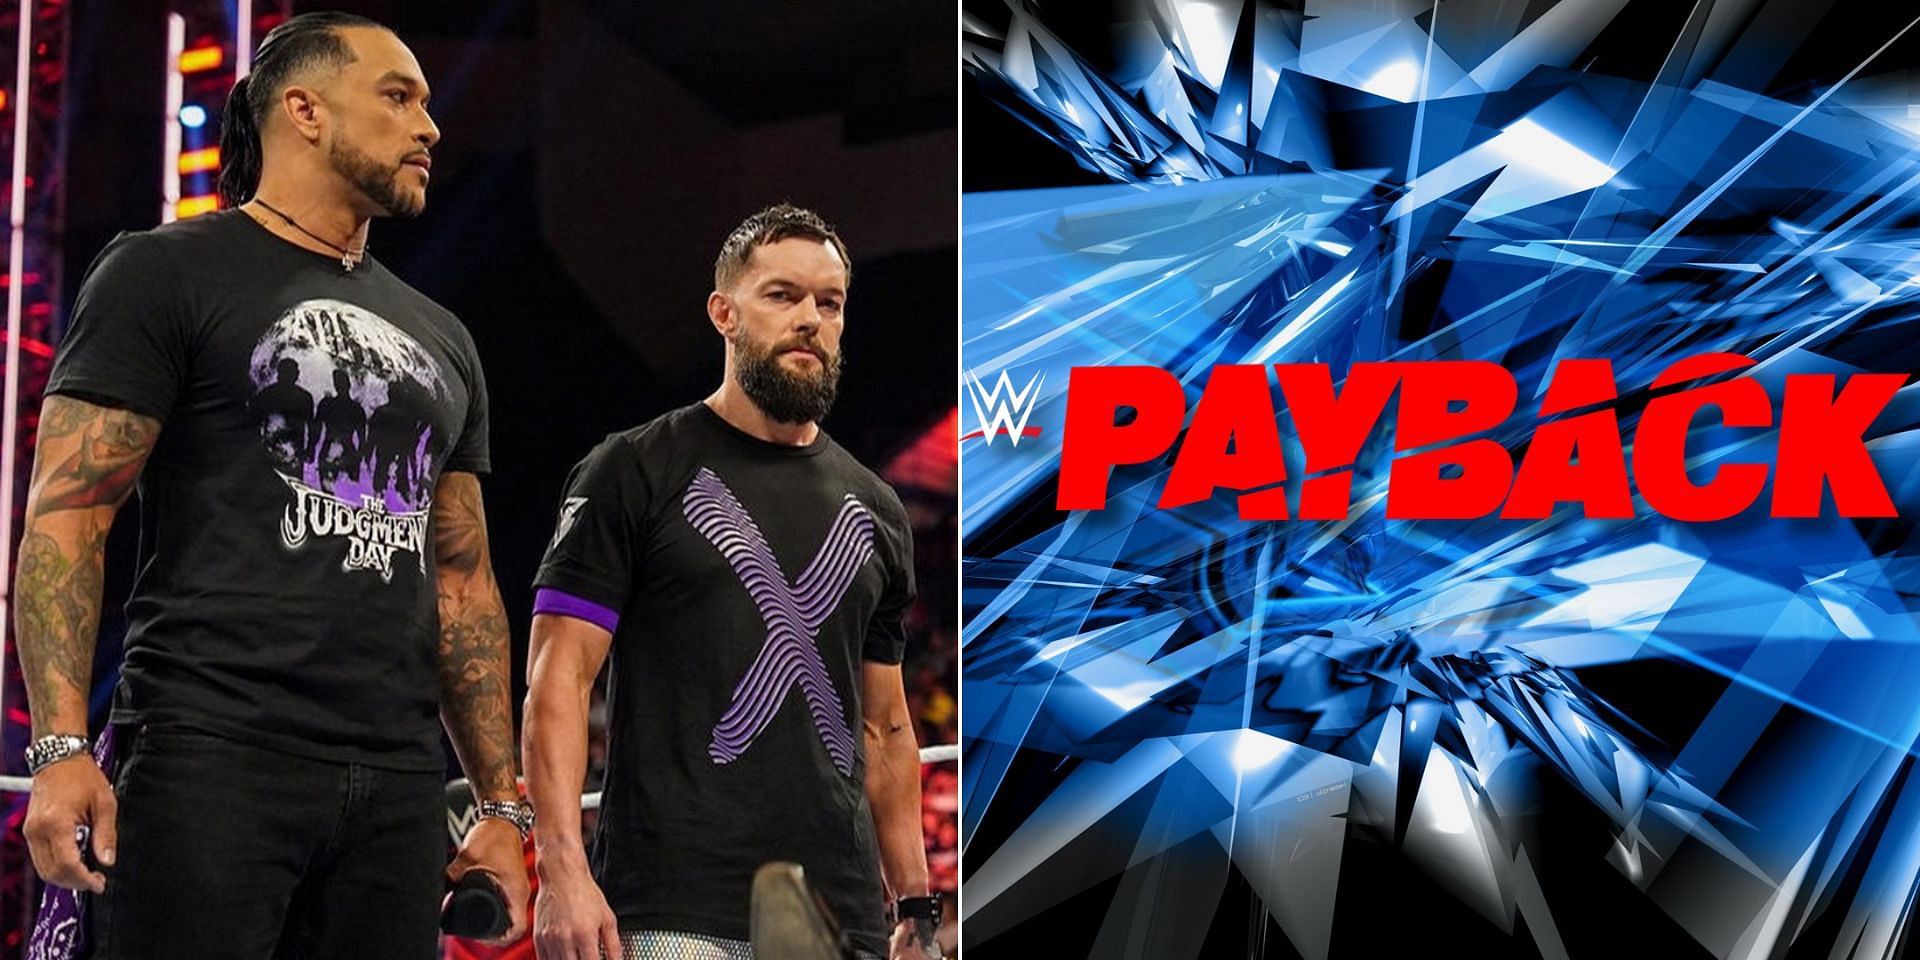 Finn Balor and Seth Rollins will compete for a title at Payback